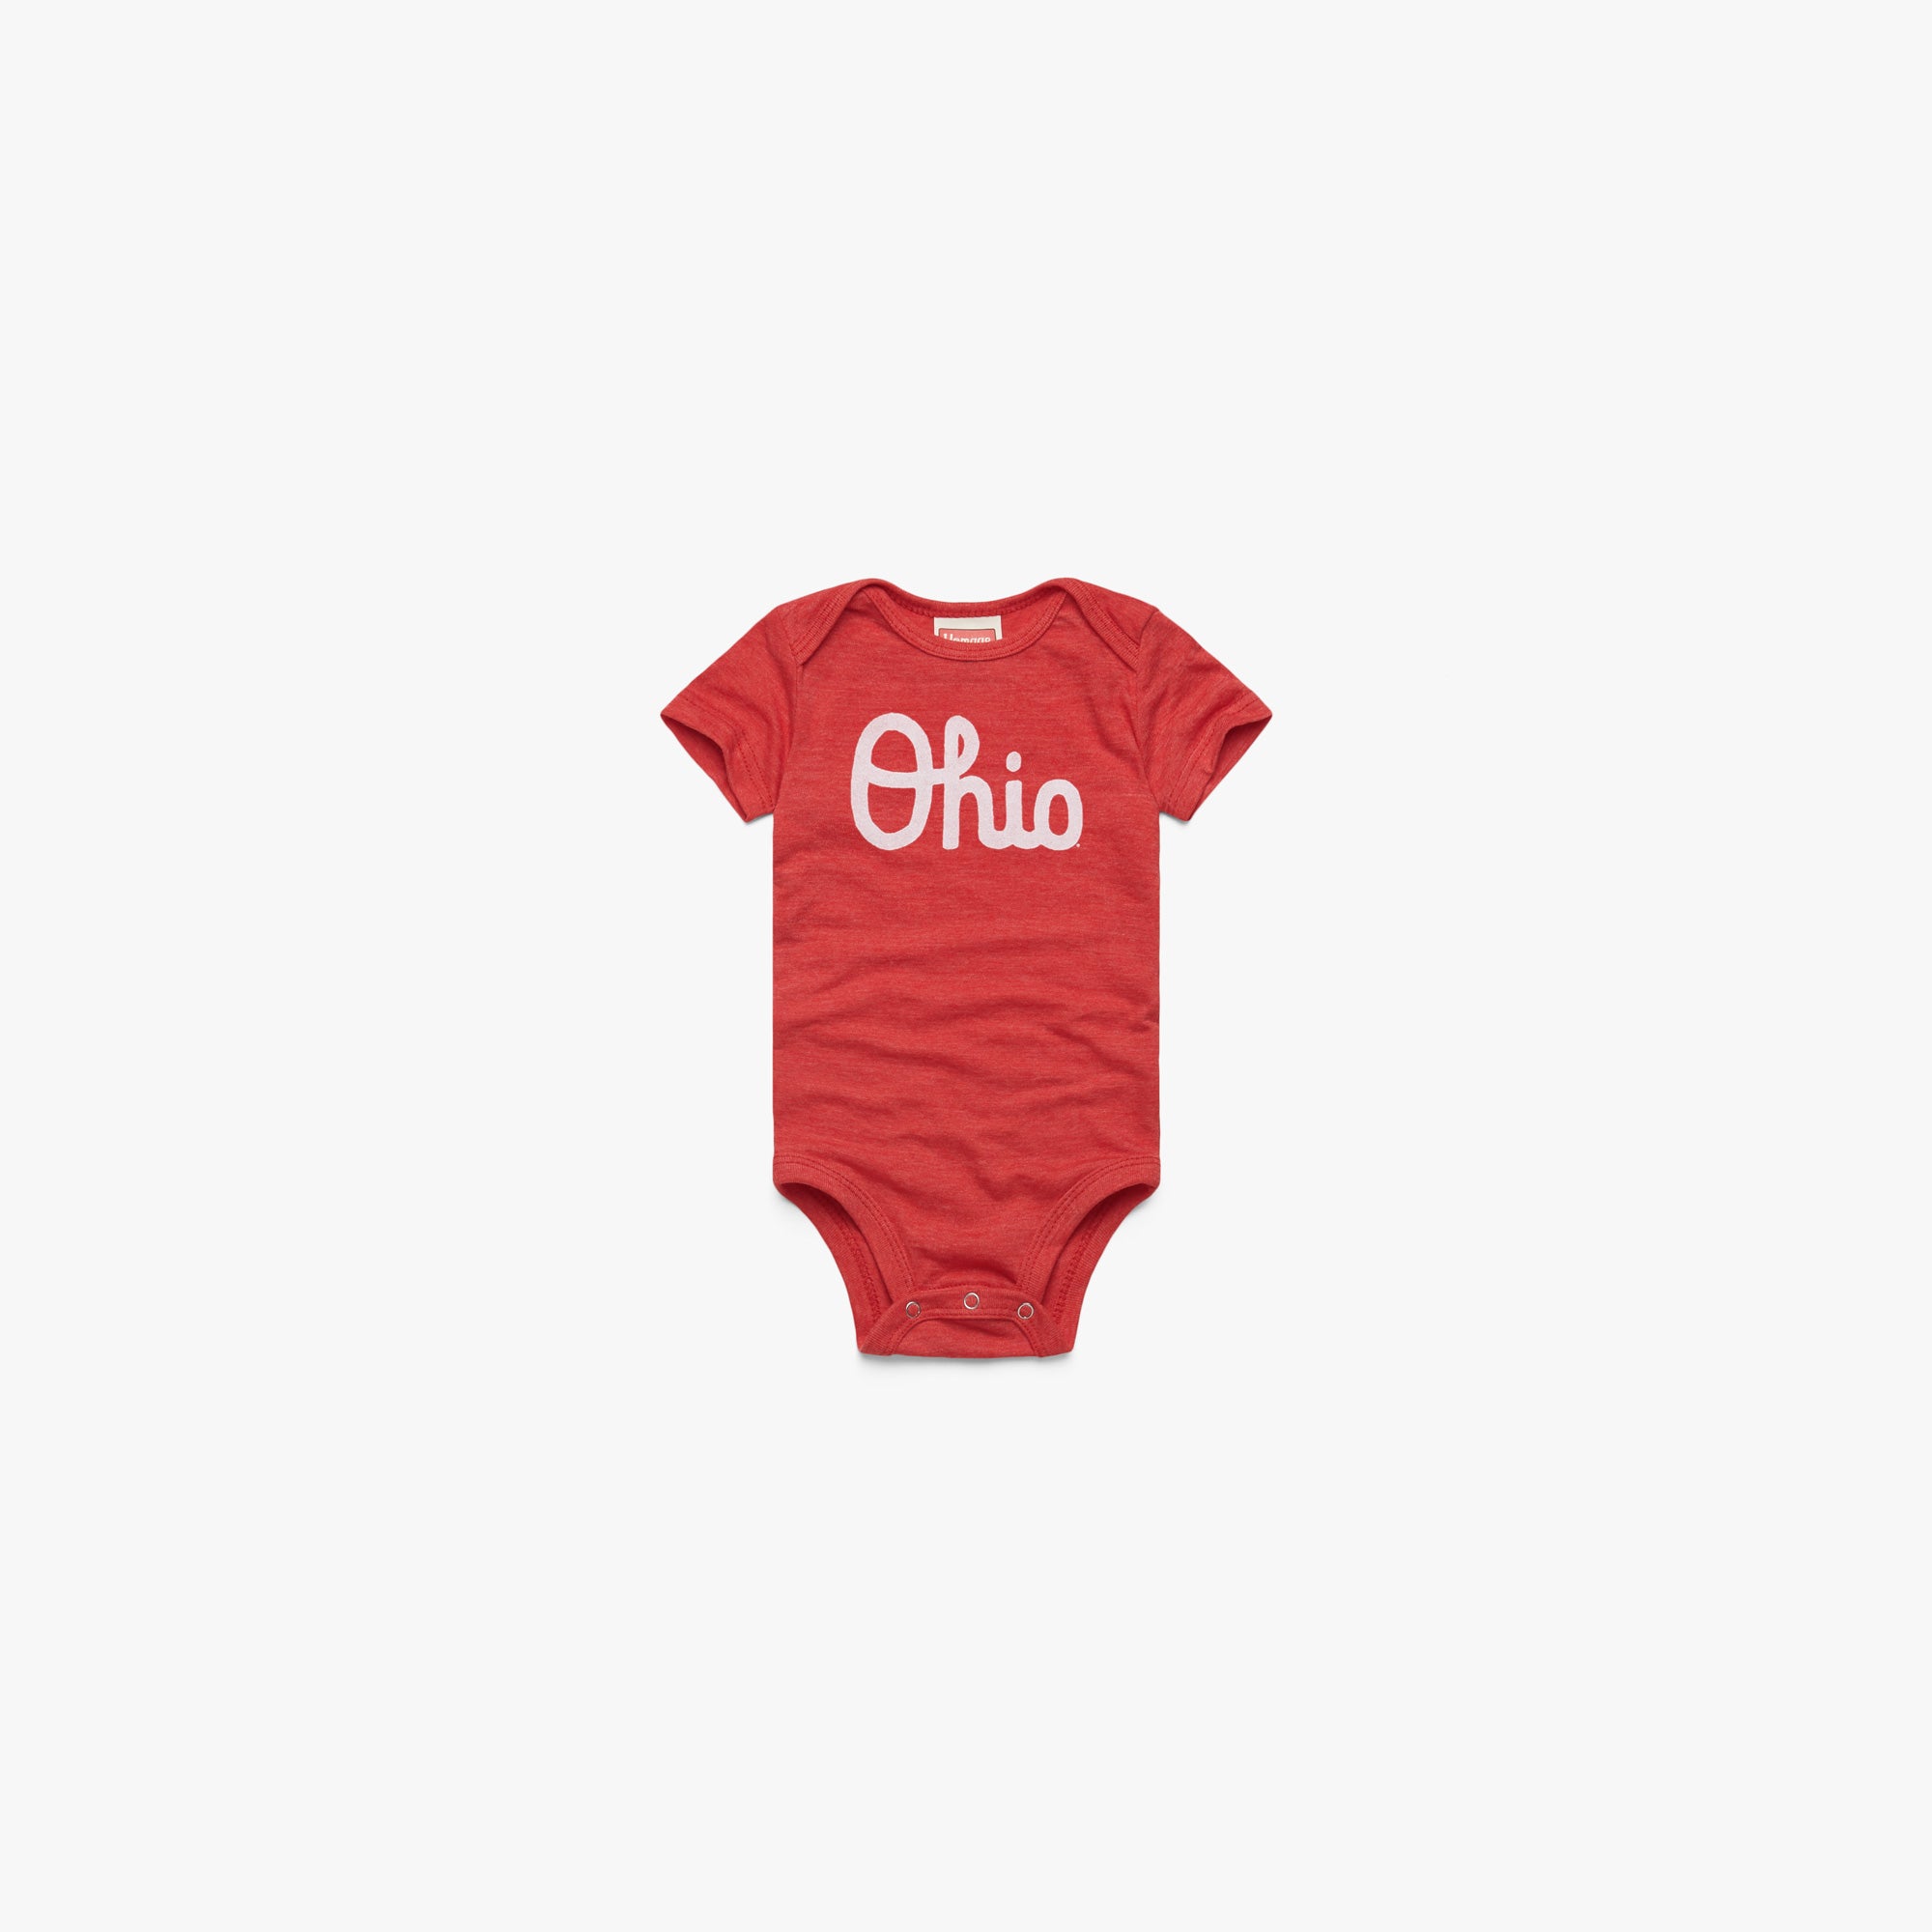 Joctober (red) v4 Baby One-Piece for Sale by KmanDesign